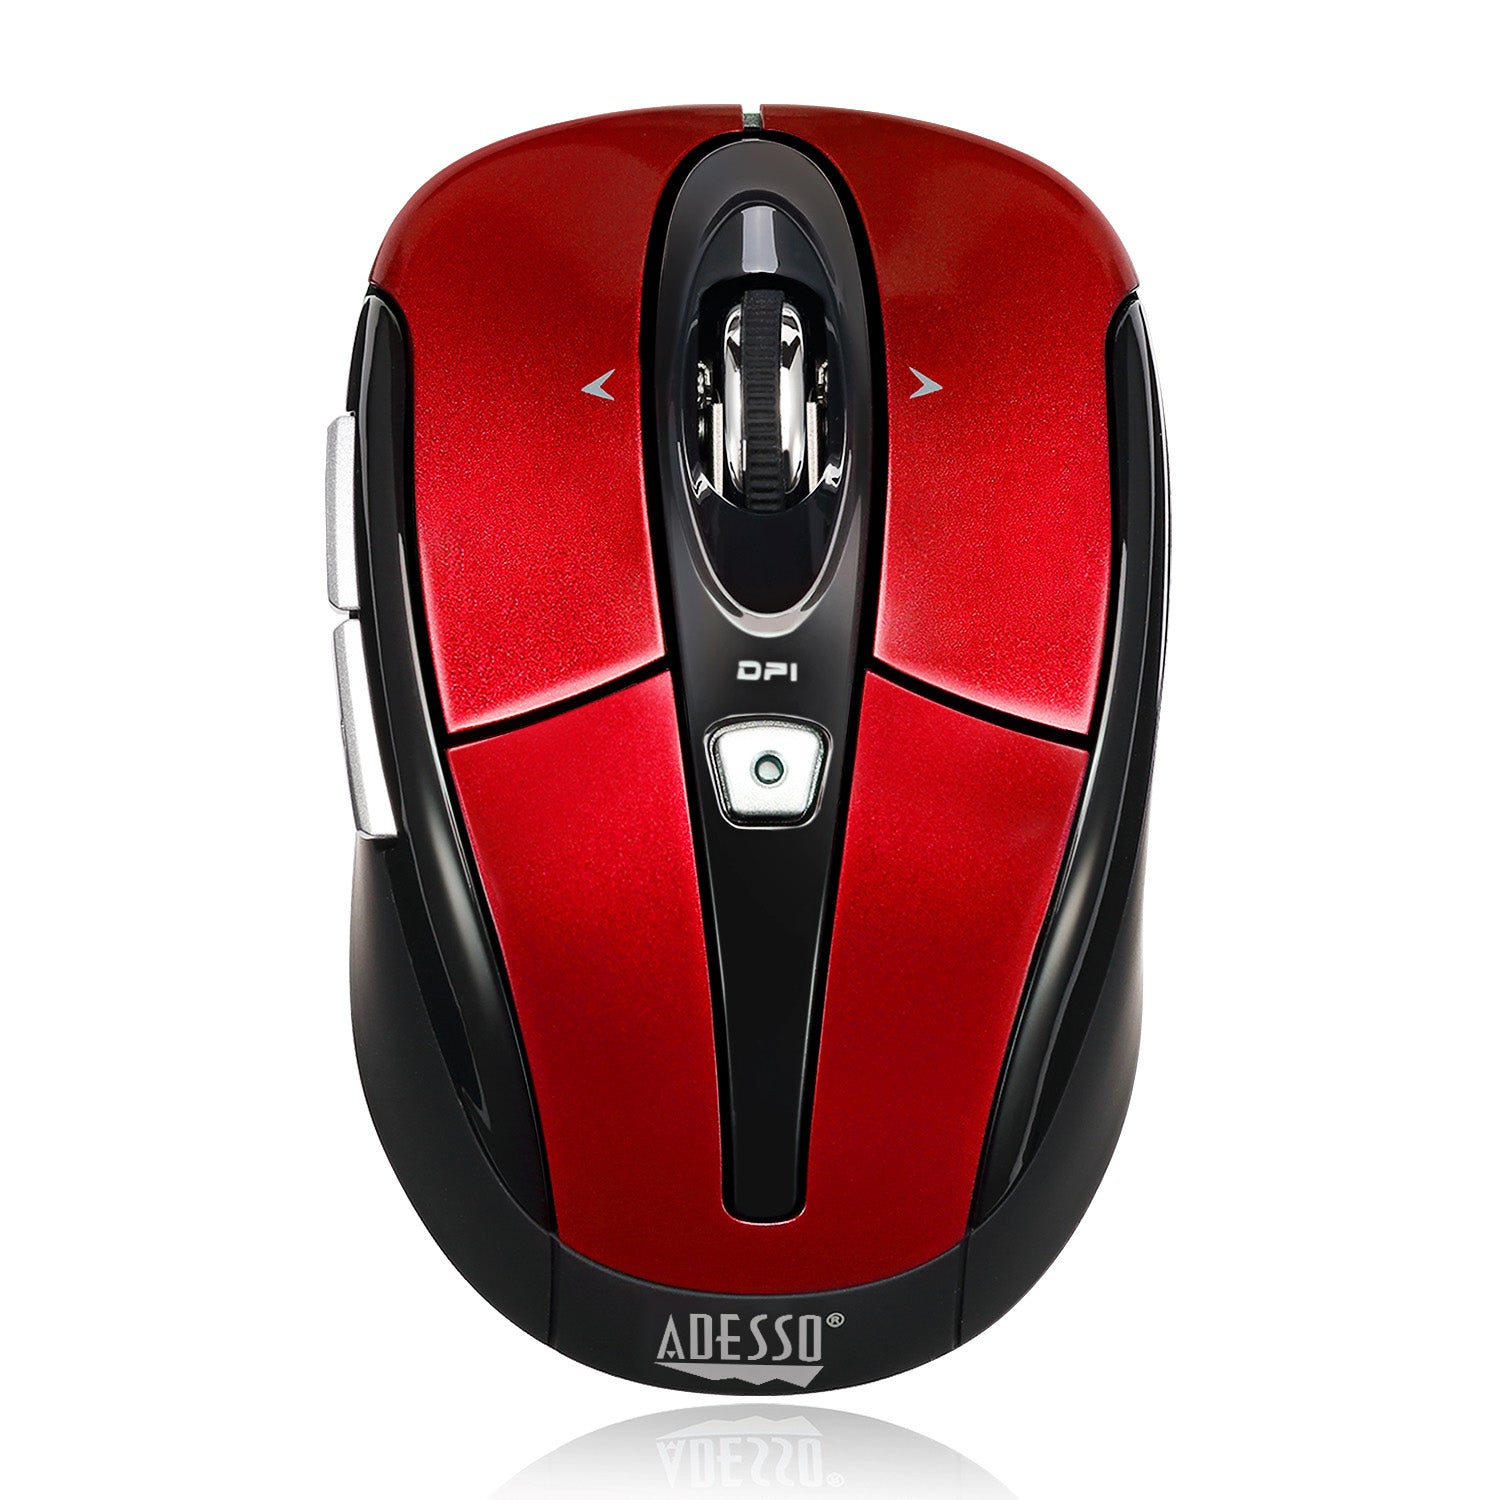 iMouse S60R - 2.4 GHz Wireless Programmable Nano Mouse